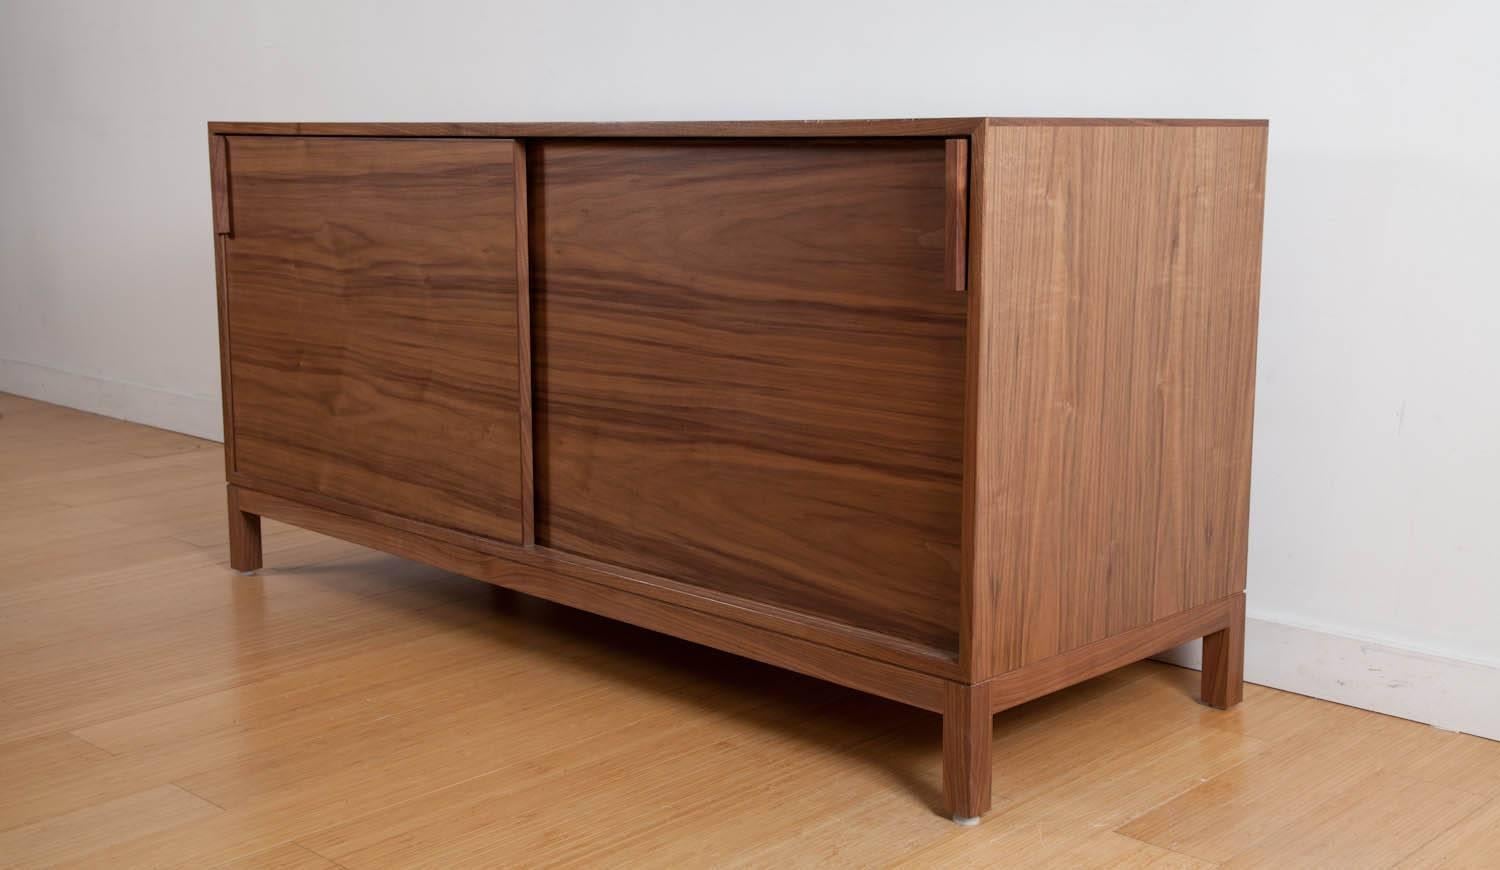 The Neary credenza is built in our Brooklyn studio using premium hardwoods and thoughtfully selected wood veneers. It is a contemporary retelling of a classic Mid-Century form, borrowing subtle details like the shadow-line reveal and the inlaid